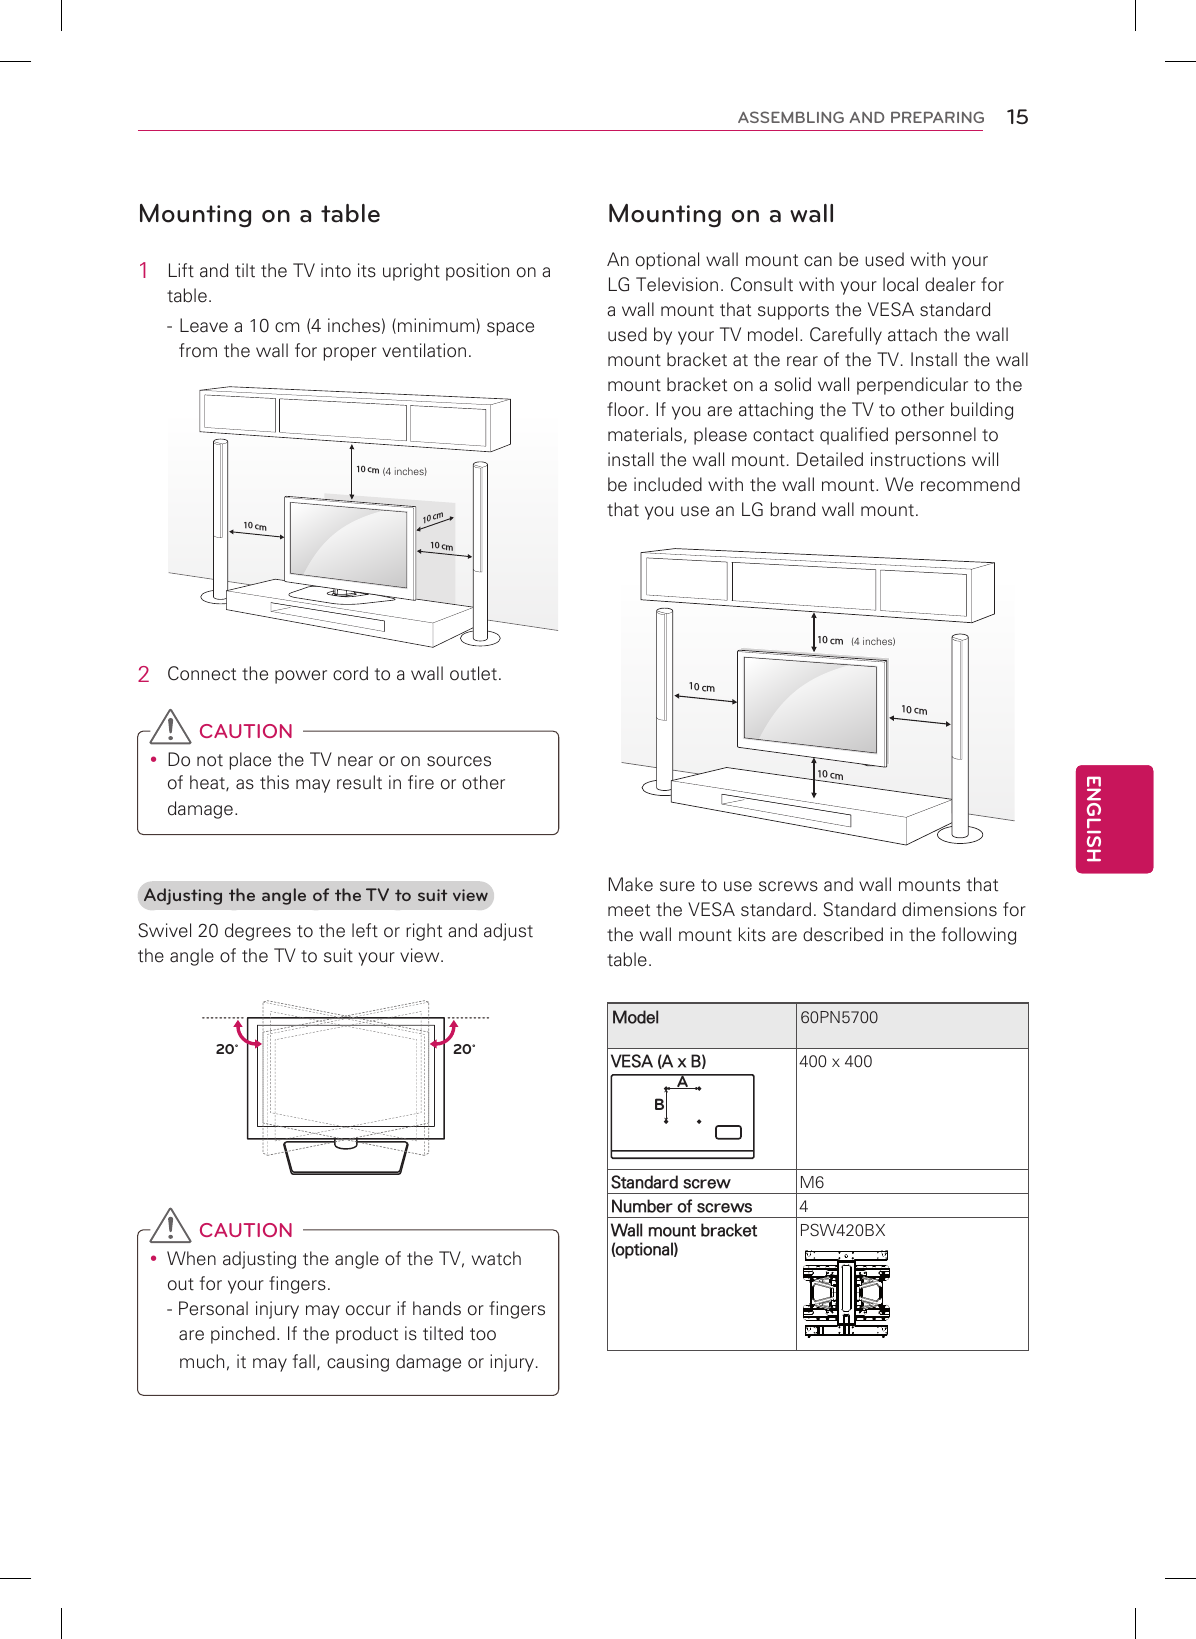 15ENGENGLISHASSEMBLING AND PREPARINGMounting on a table1  Lift and tilt the TV into its upright position on a table. - Leave a 10 cm (4 inches) (minimum) space from the wall for proper ventilation.10 cm10 cm10 cm10 cm(4 inches)2  Connect the power cord to a wall outlet. CAUTION Do not place the TV near or on sources of heat, as this may result in fire or other damage.Adjusting the angle of the TV to suit viewSwivel 20 degrees to the left or right and adjust the angle of the TV to suit your view.20˚20˚ CAUTION When adjusting the angle of the TV, watch out for your fingers.- Personal injury may occur if hands or fingers are pinched. If the product is tilted too much, it may fall, causing damage or injury.Mounting on a wallAn optional wall mount can be used with your LG Television. Consult with your local dealer for a wall mount that supports the VESA standard used by your TV model. Carefully attach the wall mount bracket at the rear of the TV. Install the wall mount bracket on a solid wall perpendicular to the floor. If you are attaching the TV to other building materials, please contact qualified personnel to install the wall mount. Detailed instructions will be included with the wall mount. We recommend that you use an LG brand wall mount.10 cm10 cm10 cm10 cm Make sure to use screws and wall mounts that meet the VESA standard. Standard dimensions for the wall mount kits are described in the following table.Model 60PN5700VESA (A x B)AB400 x 400Standard screw M6Number of screws 4Wall mount bracket (optional)PSW420BX(4 inches)